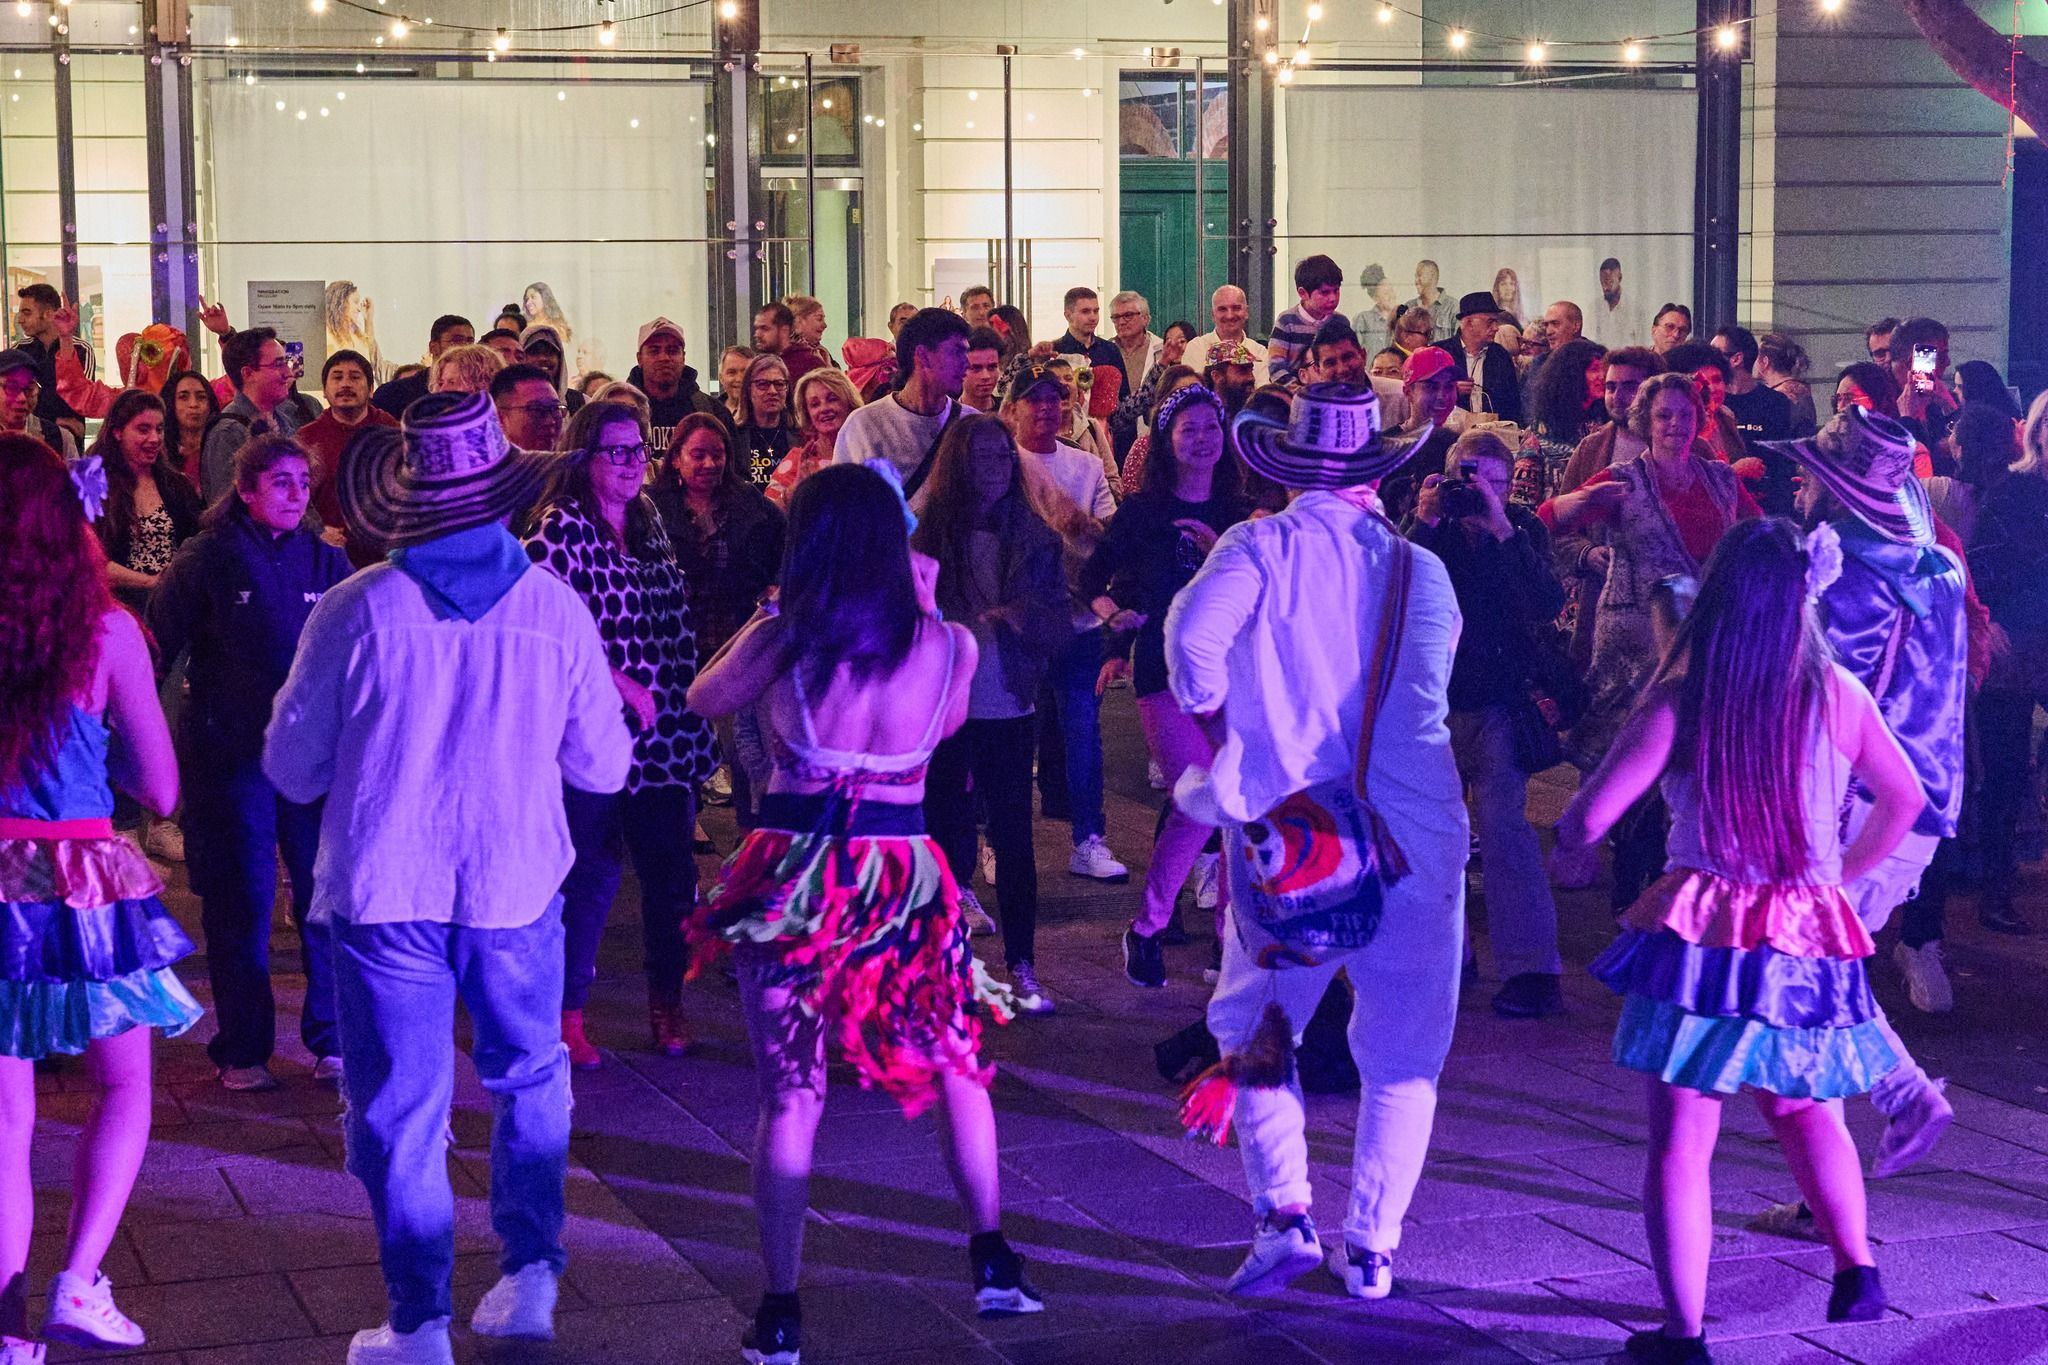 Photograph of a pop-up event at the Immigration Museum, which shows people dancing at night in the courtyard.